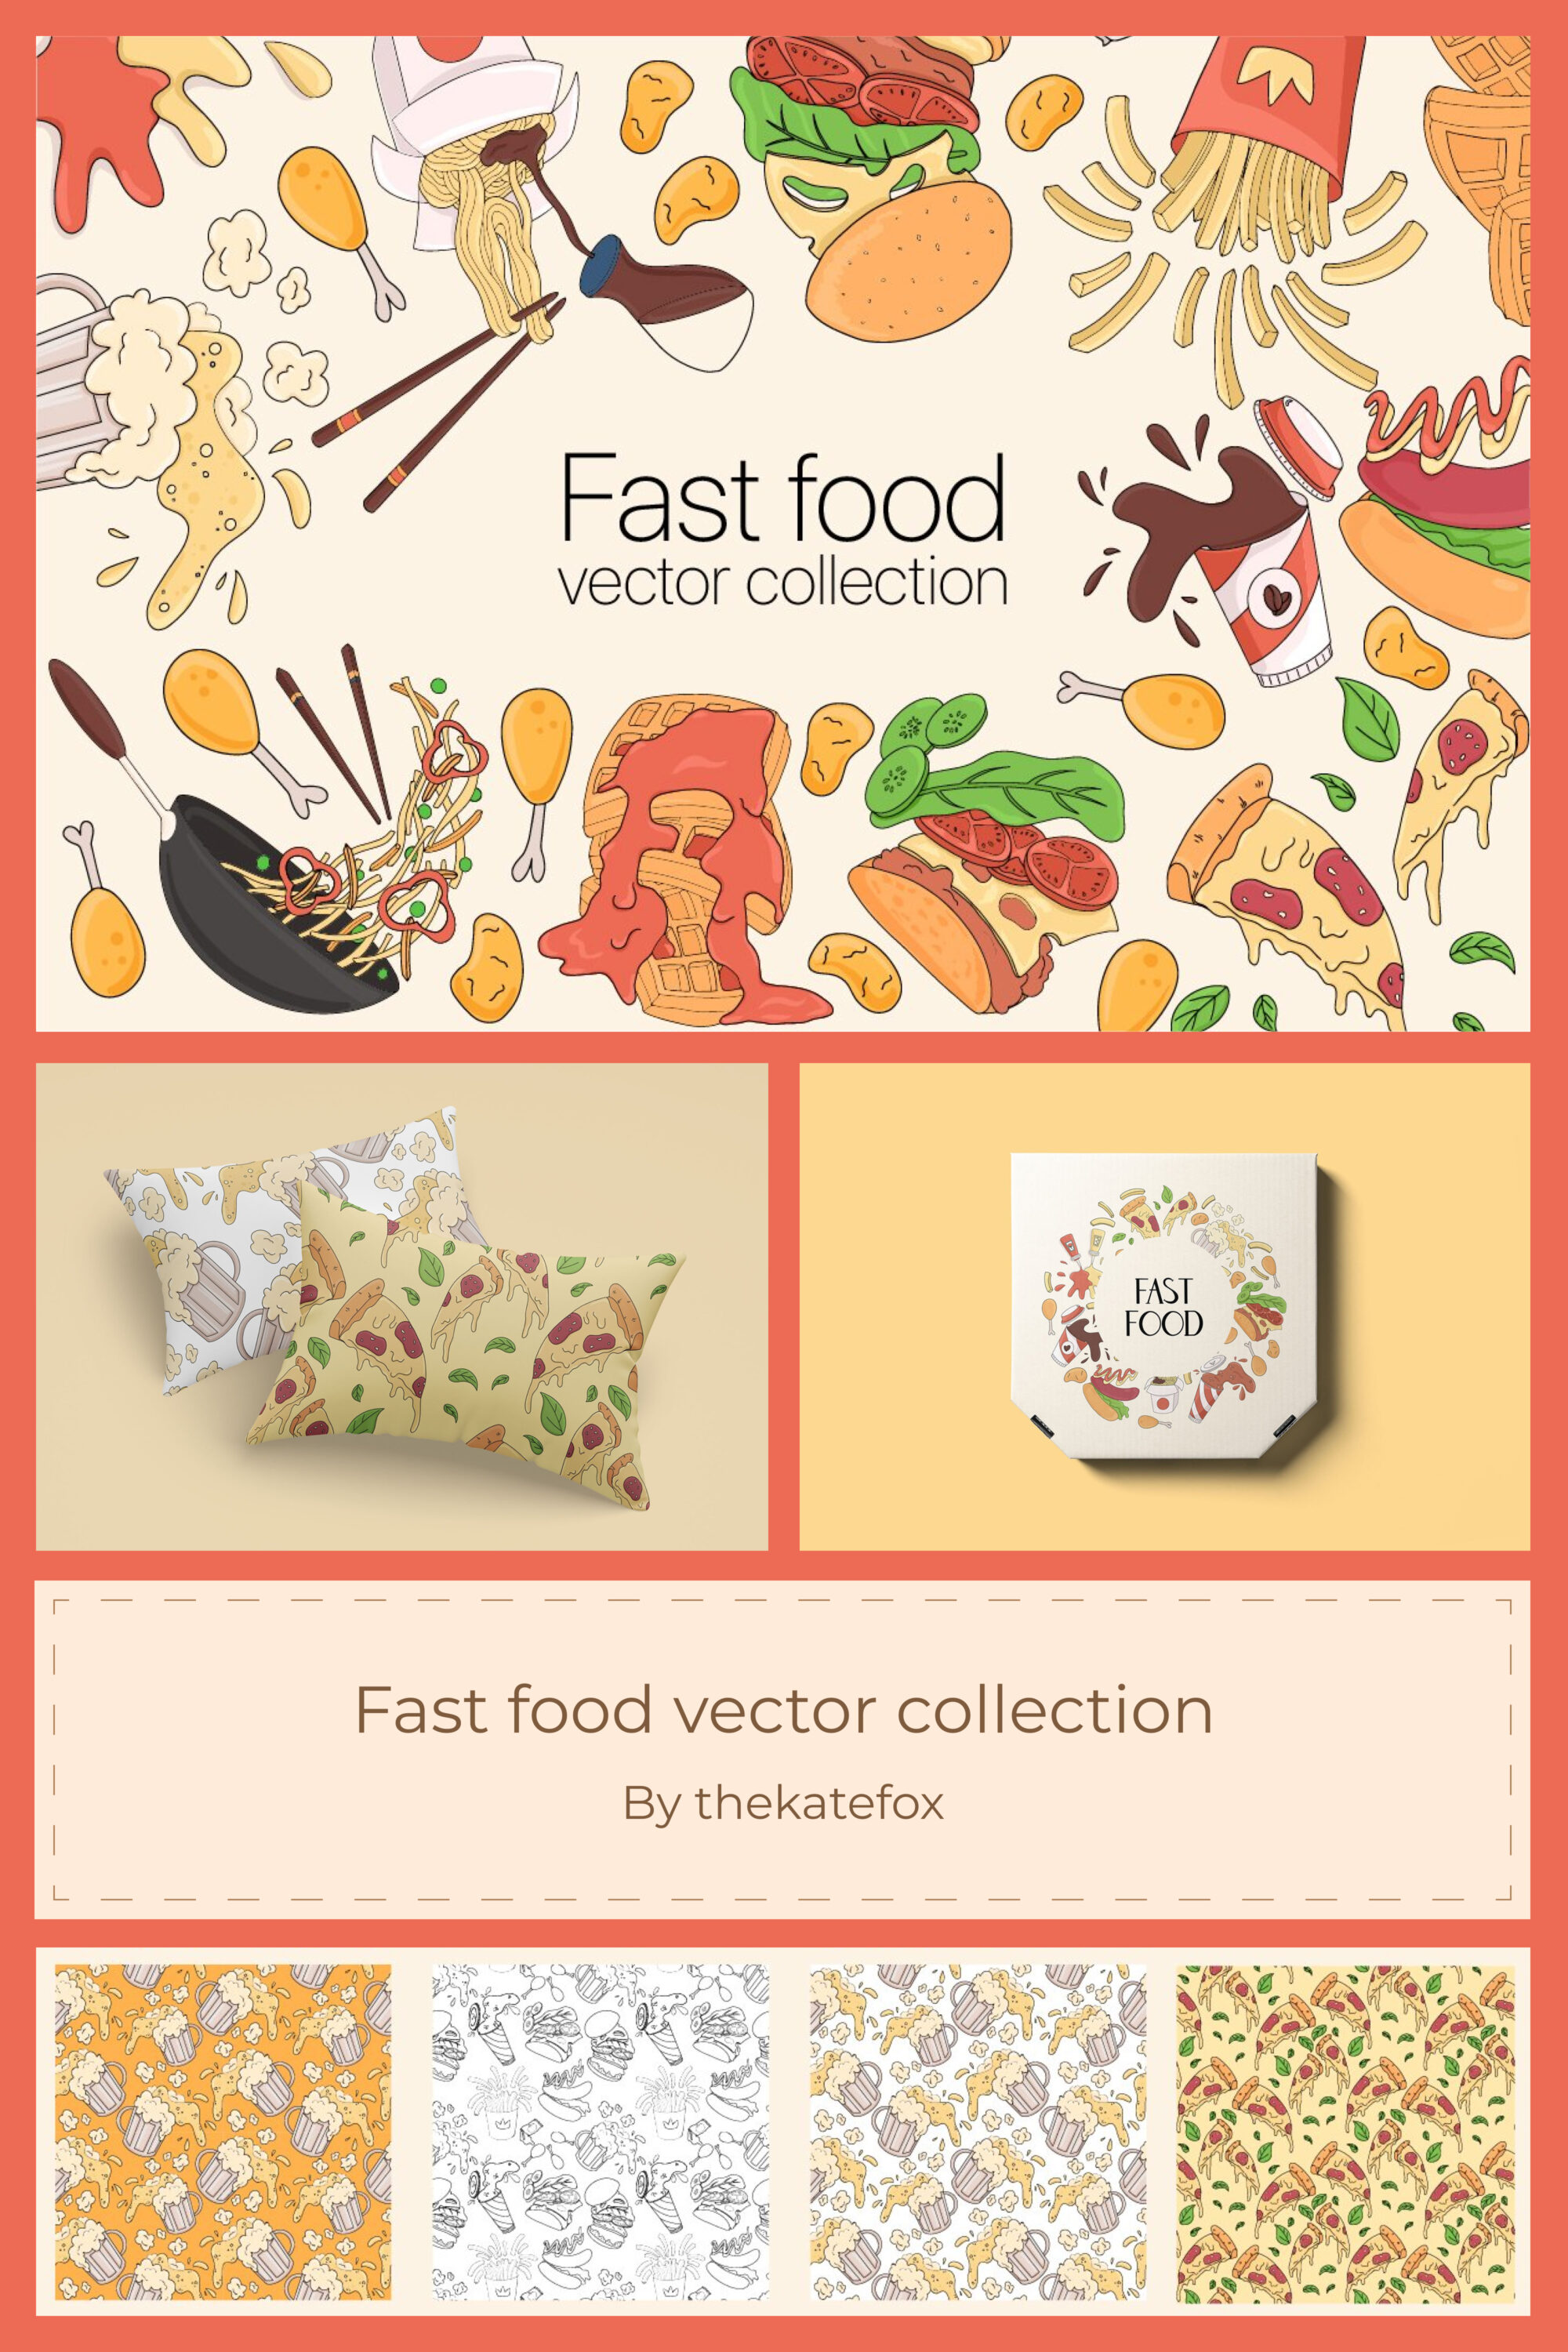 Fast food vector collection of pinterest.